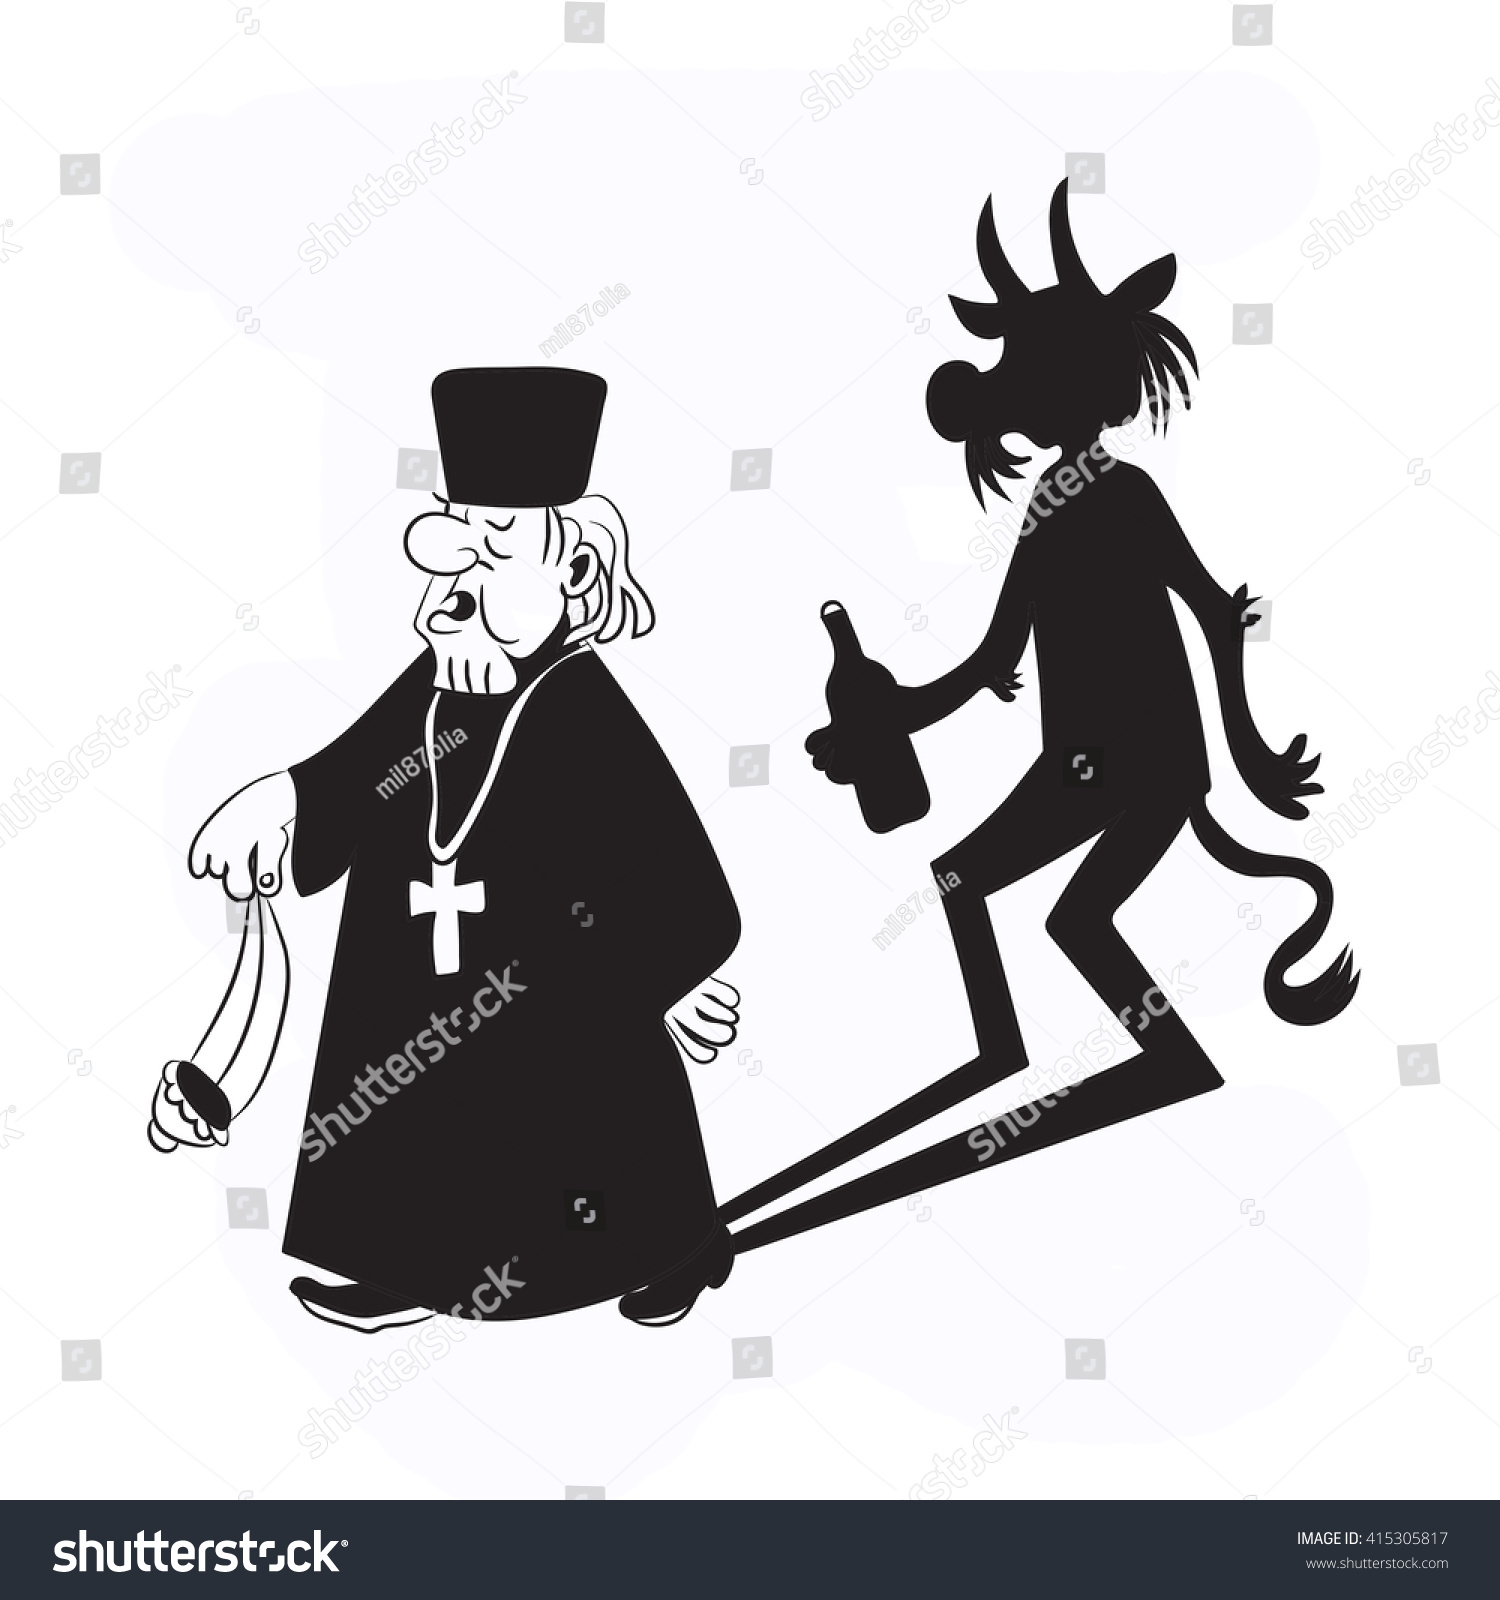 stock-vector-the-devil-is-hiding-in-a-priest-415305817.jpg